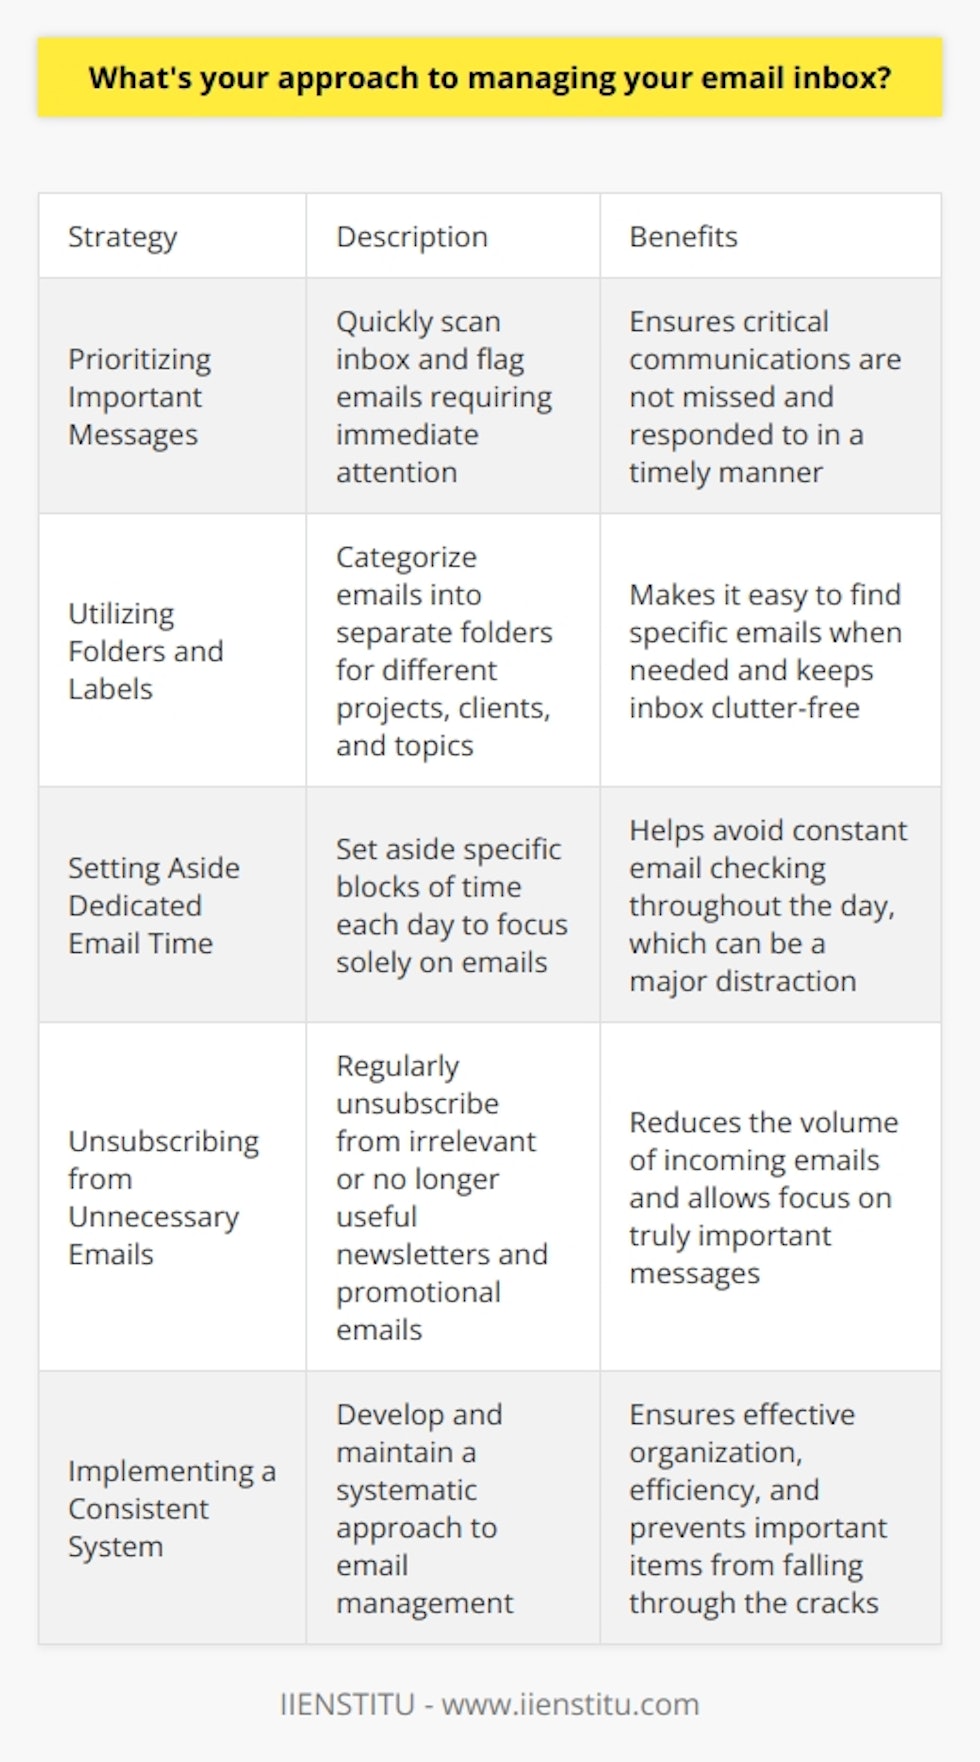 When it comes to managing my email inbox, I have a systematic approach that keeps me organized and efficient. Over the years, Ive developed a few key strategies that help me stay on top of my emails. Prioritizing Important Messages First, I prioritize messages based on their urgency and importance. I quickly scan through my inbox and flag any emails that require immediate attention. This ensures that I dont miss any critical communications and can respond in a timely manner. Utilizing Folders and Labels Next, I utilize folders and labels to categorize my emails. I have separate folders for different projects, clients, and topics. This makes it easy for me to find specific emails when I need them and keeps my inbox clutter-free. Setting Aside Dedicated Email Time I also set aside dedicated time each day to focus solely on emails. During these blocks of time, I go through my inbox methodically, responding to messages, filing them away, or deleting them as needed. This helps me avoid constantly checking my email throughout the day, which can be a major distraction. Unsubscribing from Unnecessary Emails Finally, I regularly unsubscribe from newsletters or promotional emails that I no longer find relevant or useful. This cuts down on the volume of emails I receive and allows me to focus on the messages that truly matter. By implementing these strategies, Im able to effectively manage my email inbox and ensure that nothing falls through the cracks. Its a system that has served me well in both my personal and professional life, and Im confident it will continue to do so in this role.